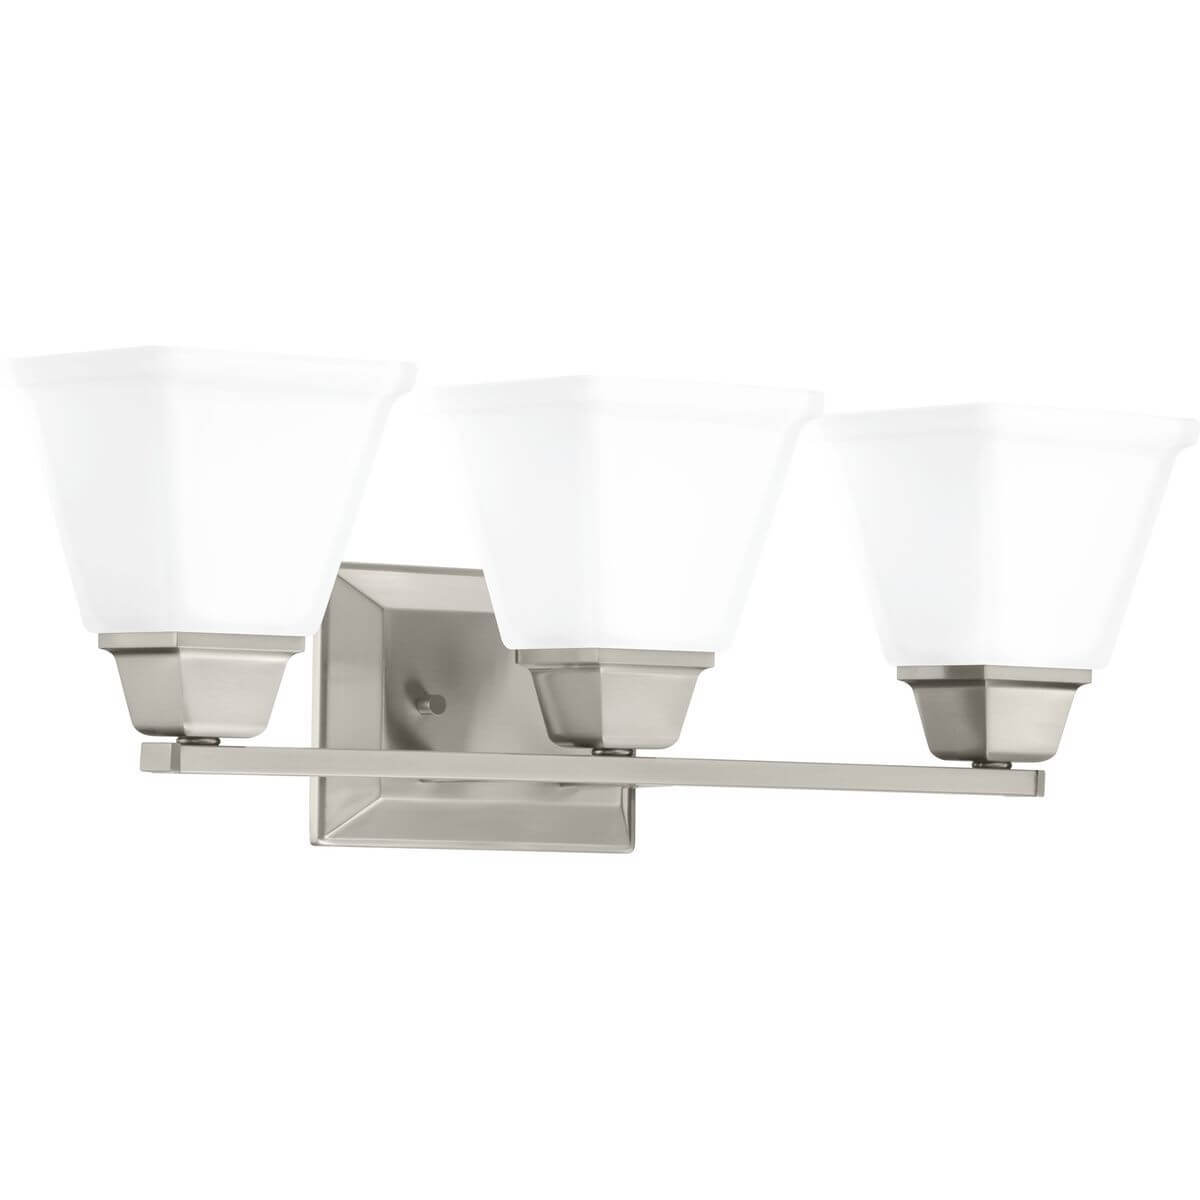 Progress Lighting Clifton Heights 3 Light 23 inch Bath Vanity Light in Brushed Nickel with Etched Glass P300160-009